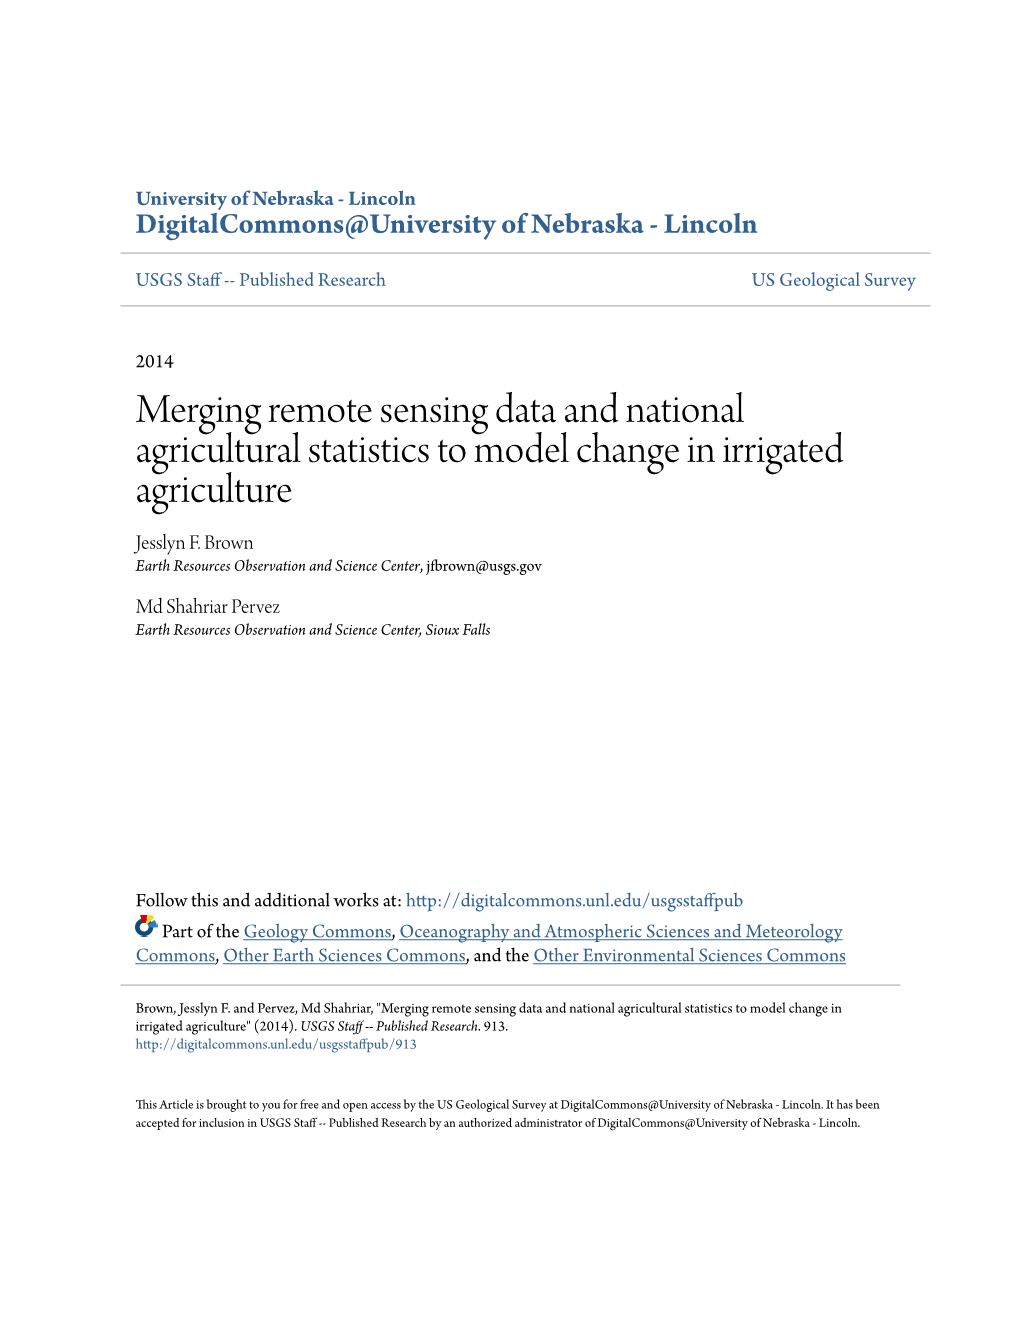 Merging Remote Sensing Data and National Agricultural Statistics to Model Change in Irrigated Agriculture Jesslyn F